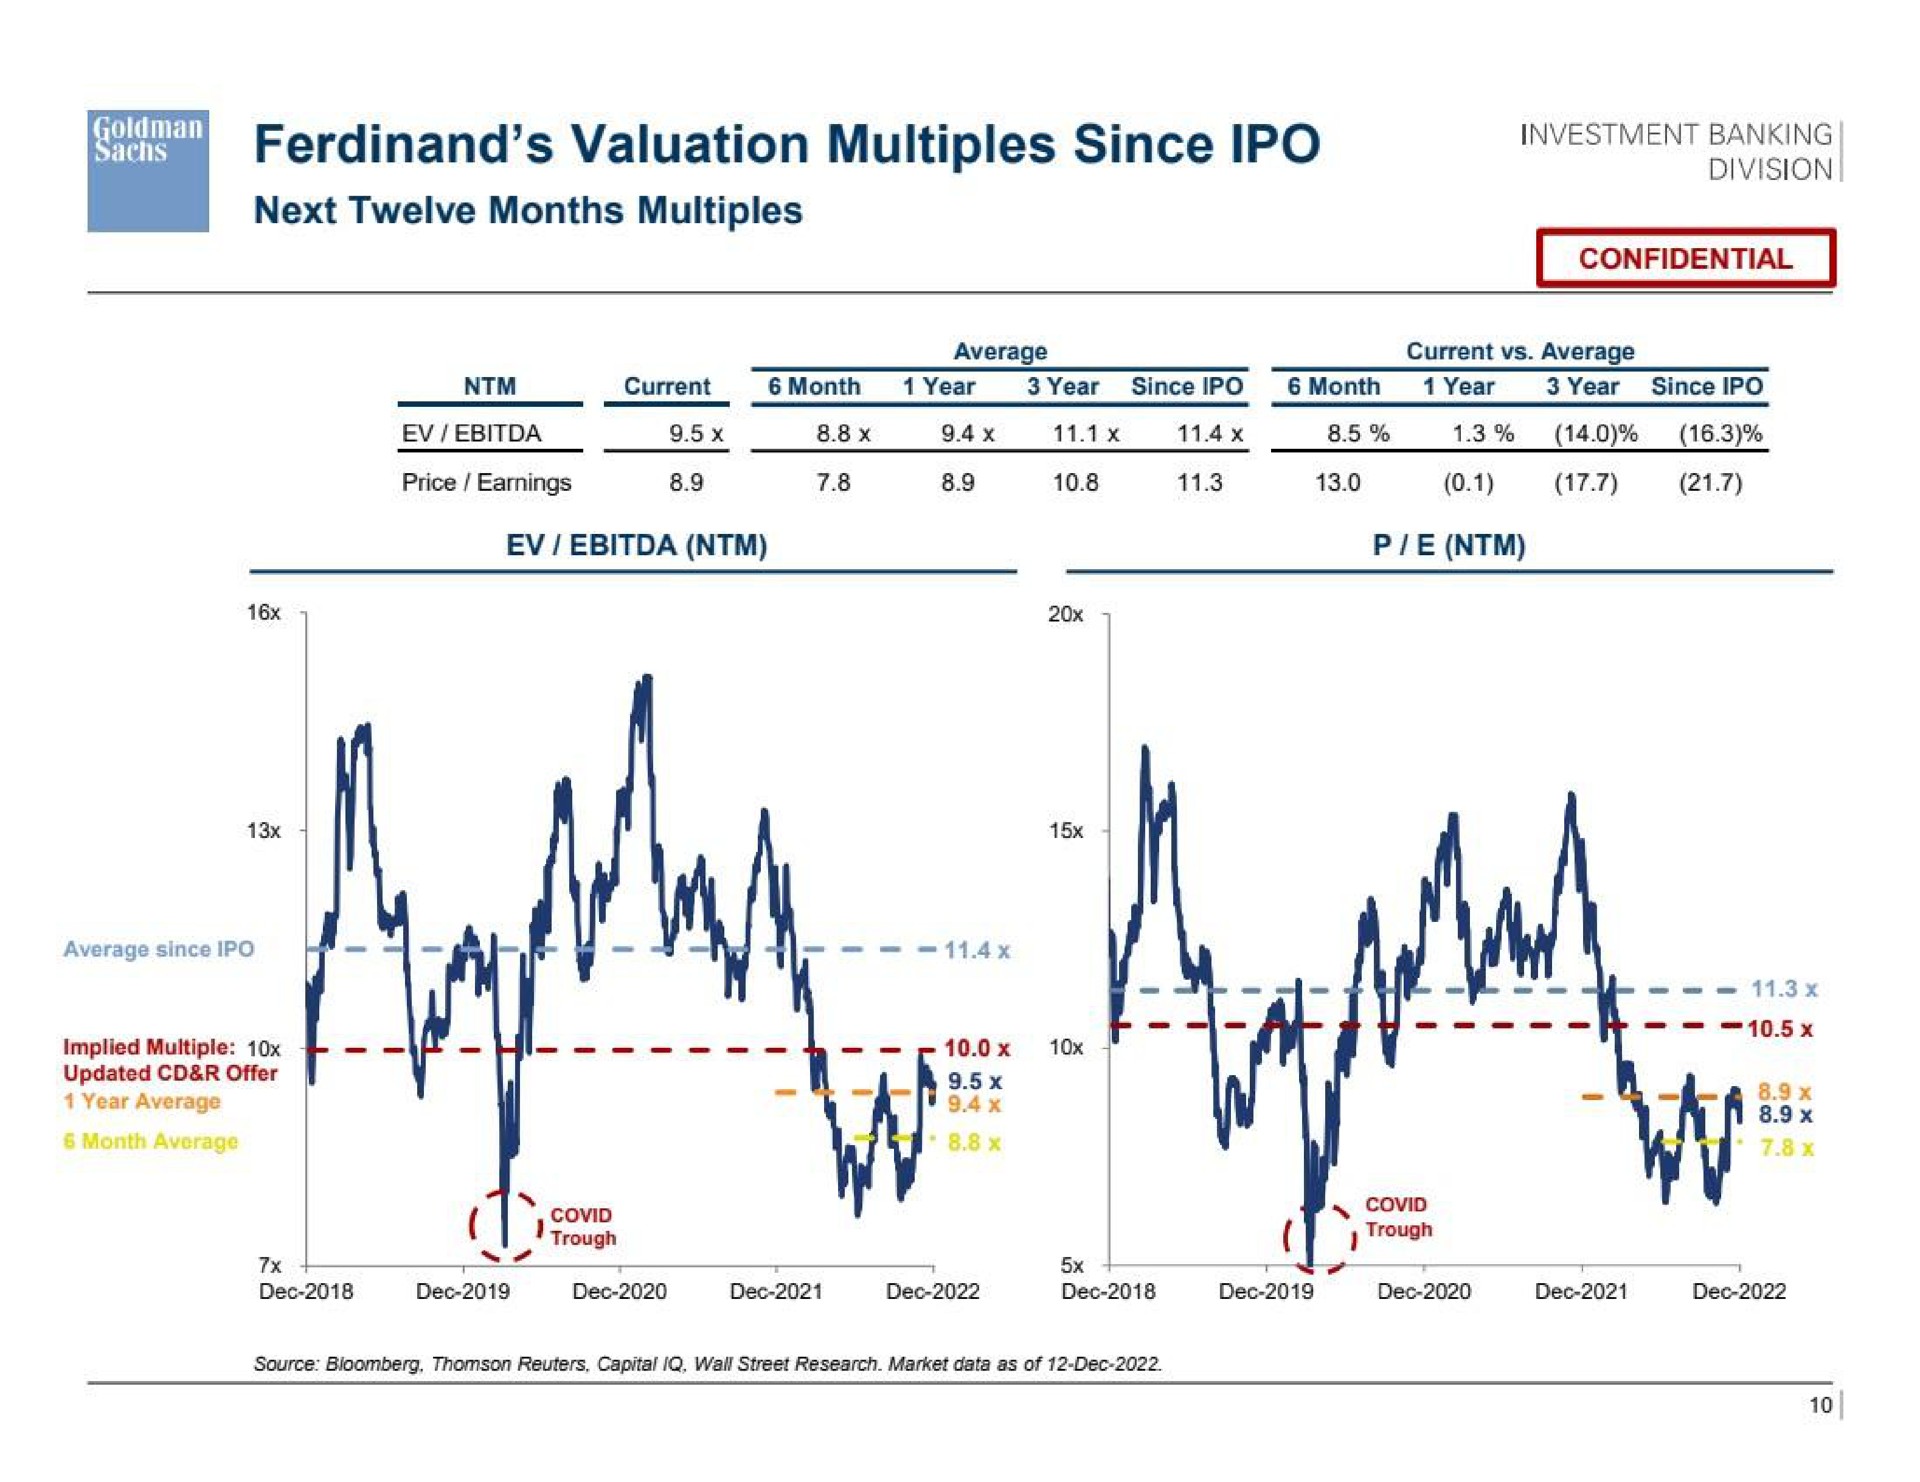 a valuation multiples since investment sang | Goldman Sachs